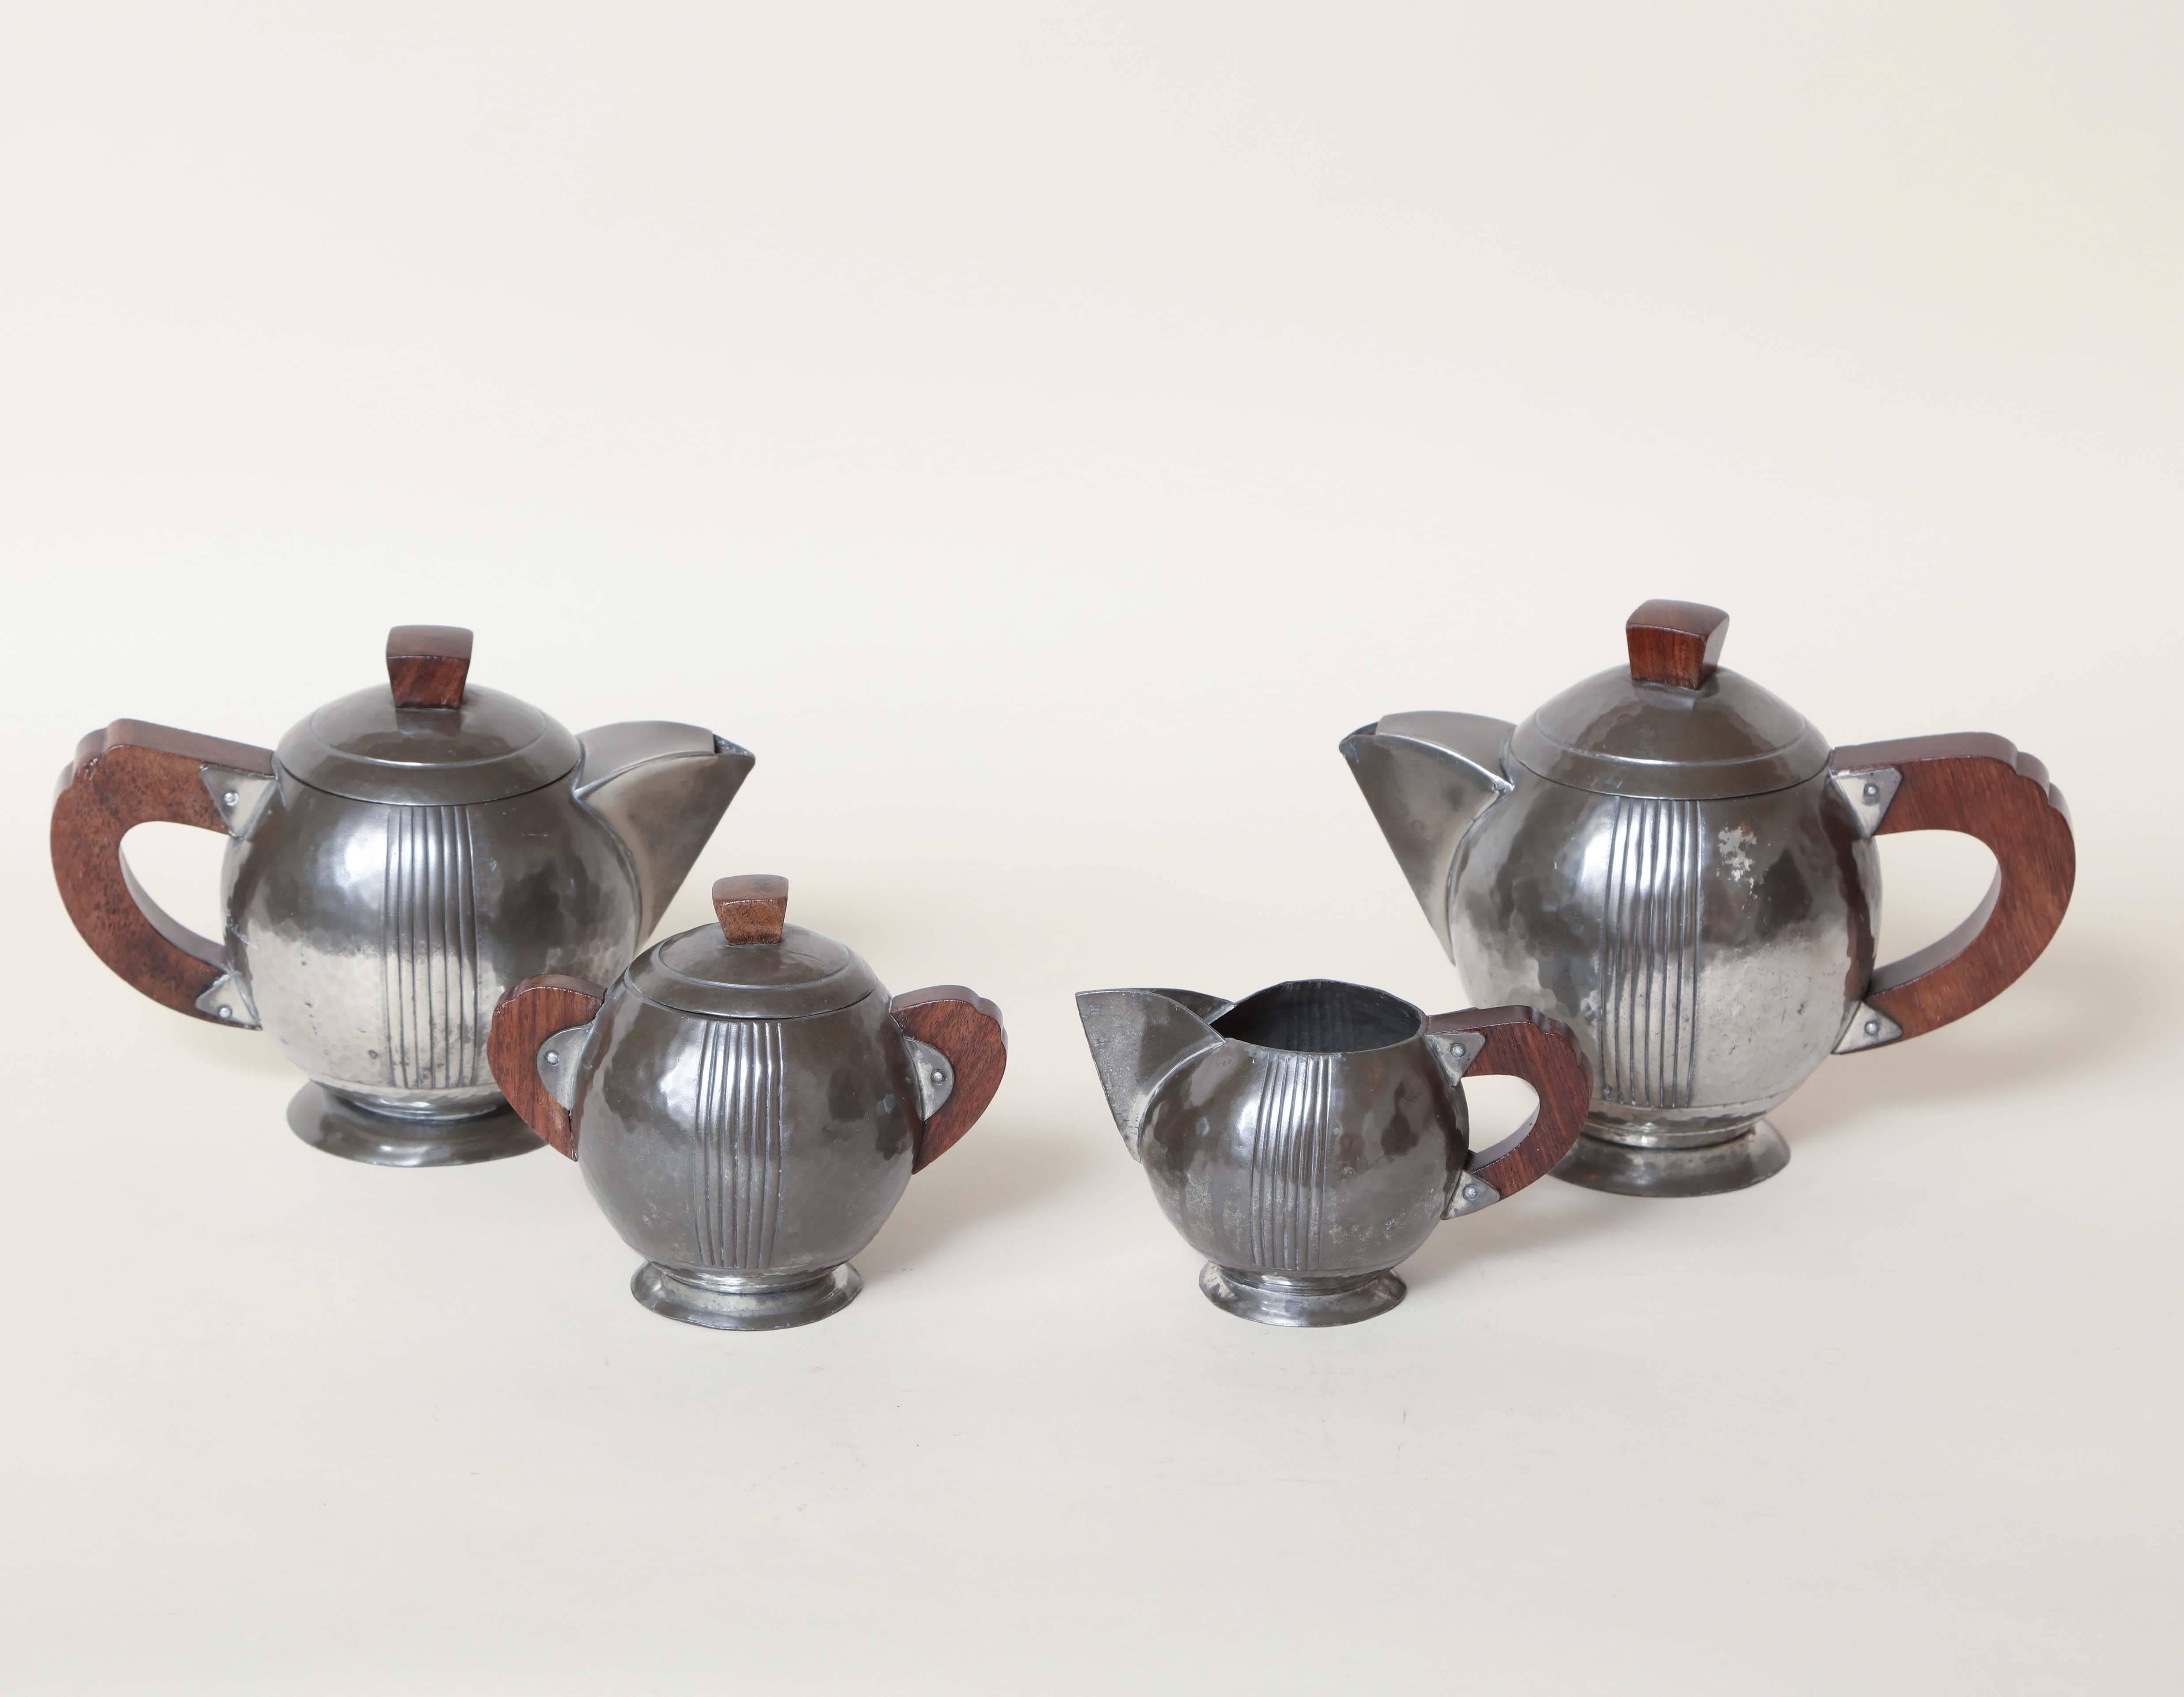 Hand-wrought dinanderie pewter martele coffee and tea service with vertical lines on body and rosewood handles and finials.

Measures: Teapot: 6 5/8'' high, 8 1/2'' wide, 4 ½'' long.
Coffee pot: 5 ¾'' high, 8'' wide, 4 ½'' long.
Sugar bowl: 4 ¾''